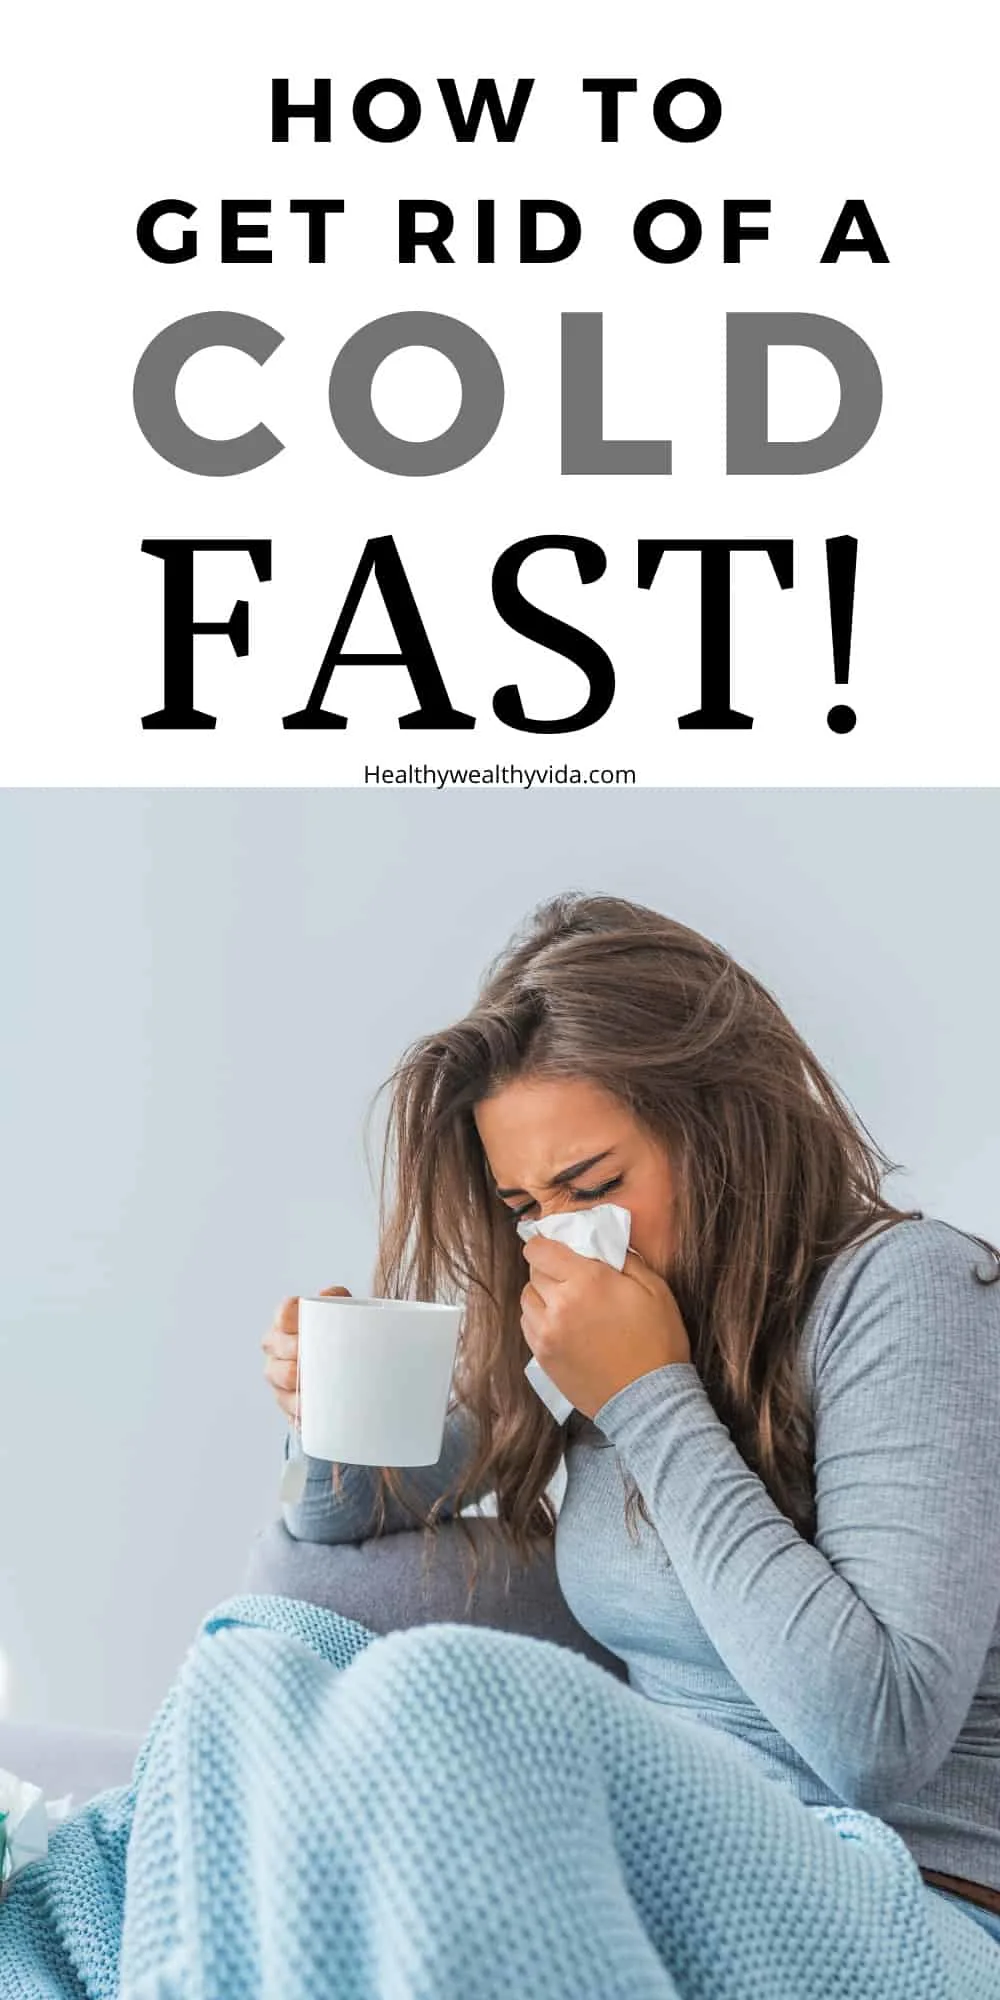 How to get rid of a cold fast and naturally